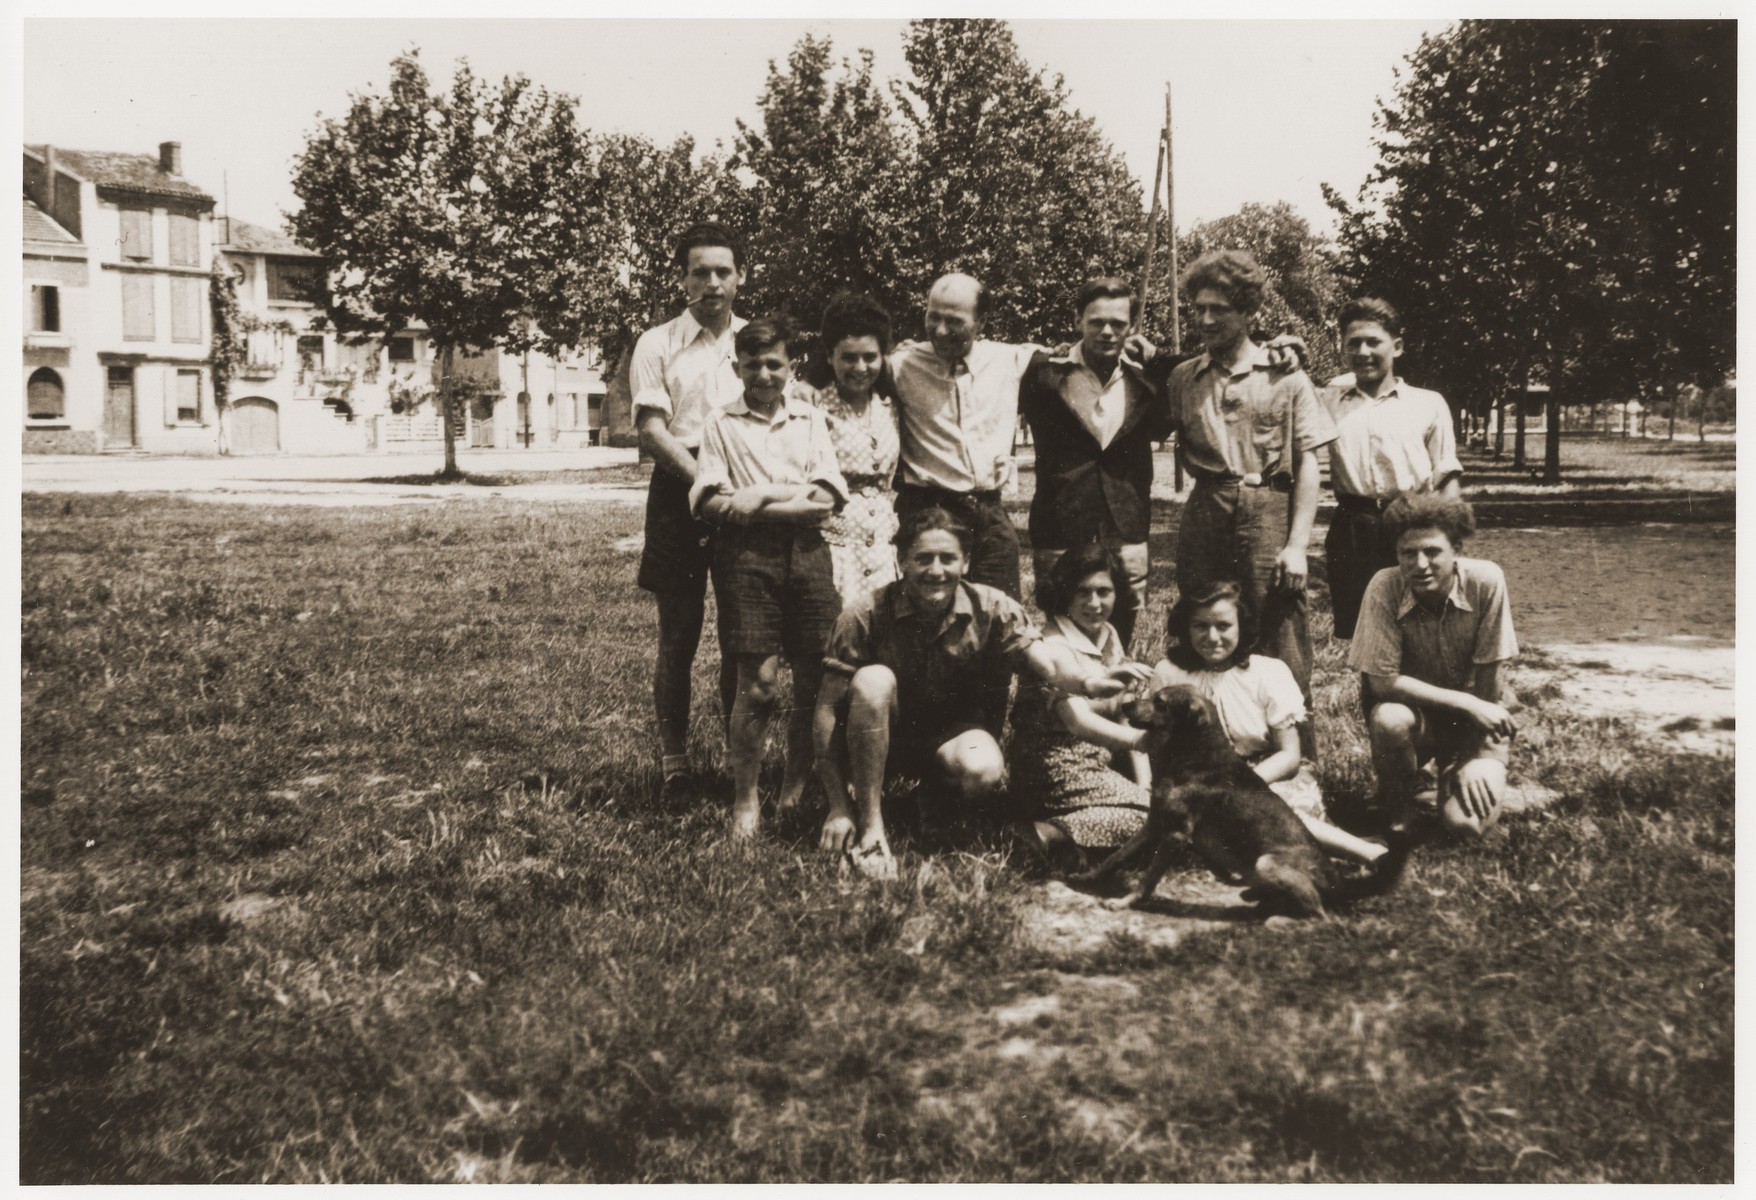 Group portrait of Jewish youth at the Hotel du Moulin in Moissac.  

The Hotel du Moulin residence for displaced Jewish youth was operated by the French-Jewish scouting movement, Eclaireurs Israelites de France.  Among those pictured is Walter Karliner (back row, third from the right).